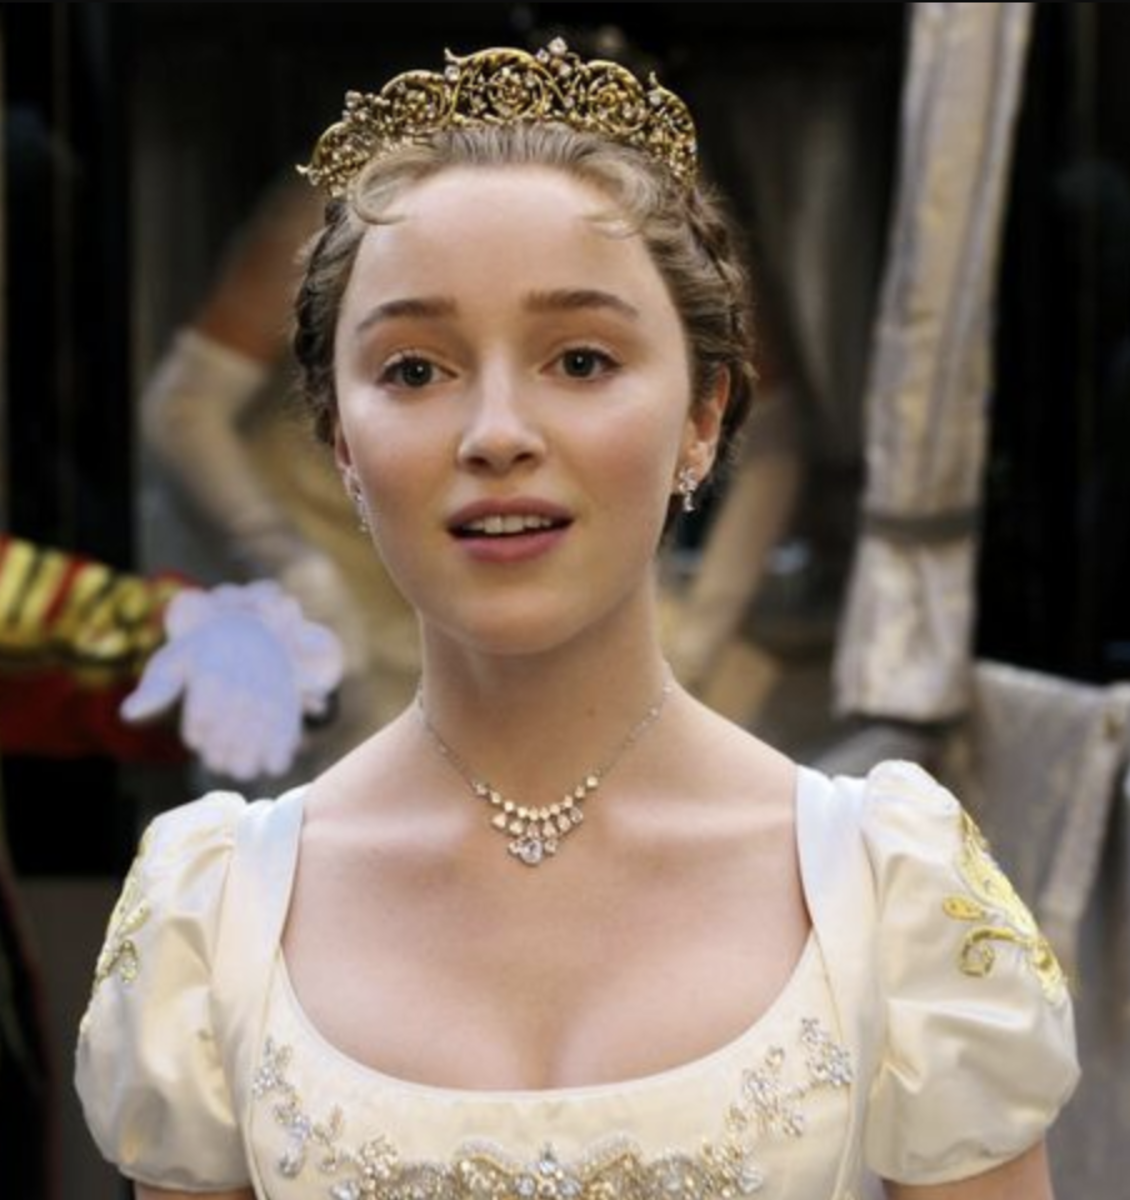 This is Phoebe Dynevor as Daphne Bridgerton from the series "Bridgerton," which is known for its sumptuous costume design.